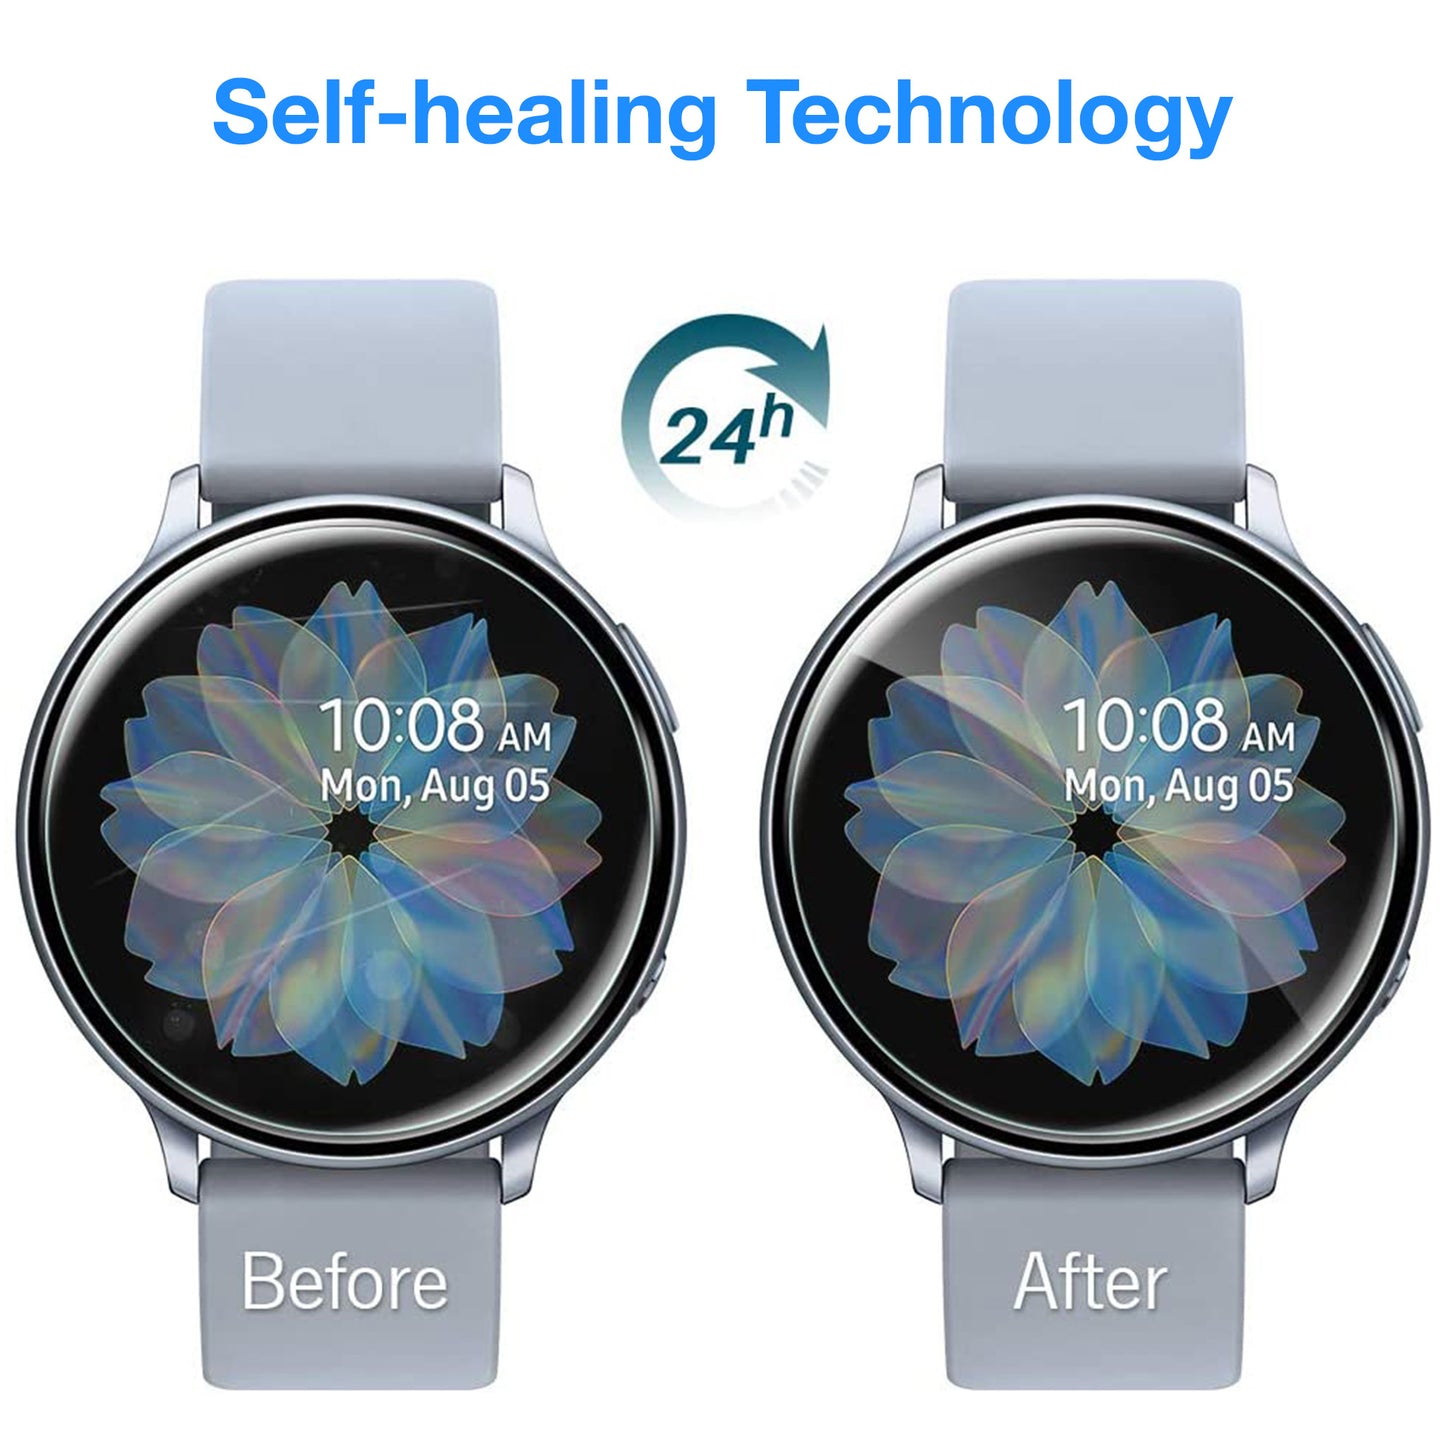 [3 Pack] MEZON Samsung Galaxy Watch6 (40 mm) Ultra Clear TPU Film Screen Protectors – Shock Absorption (Watch 6 40mm, Clear)